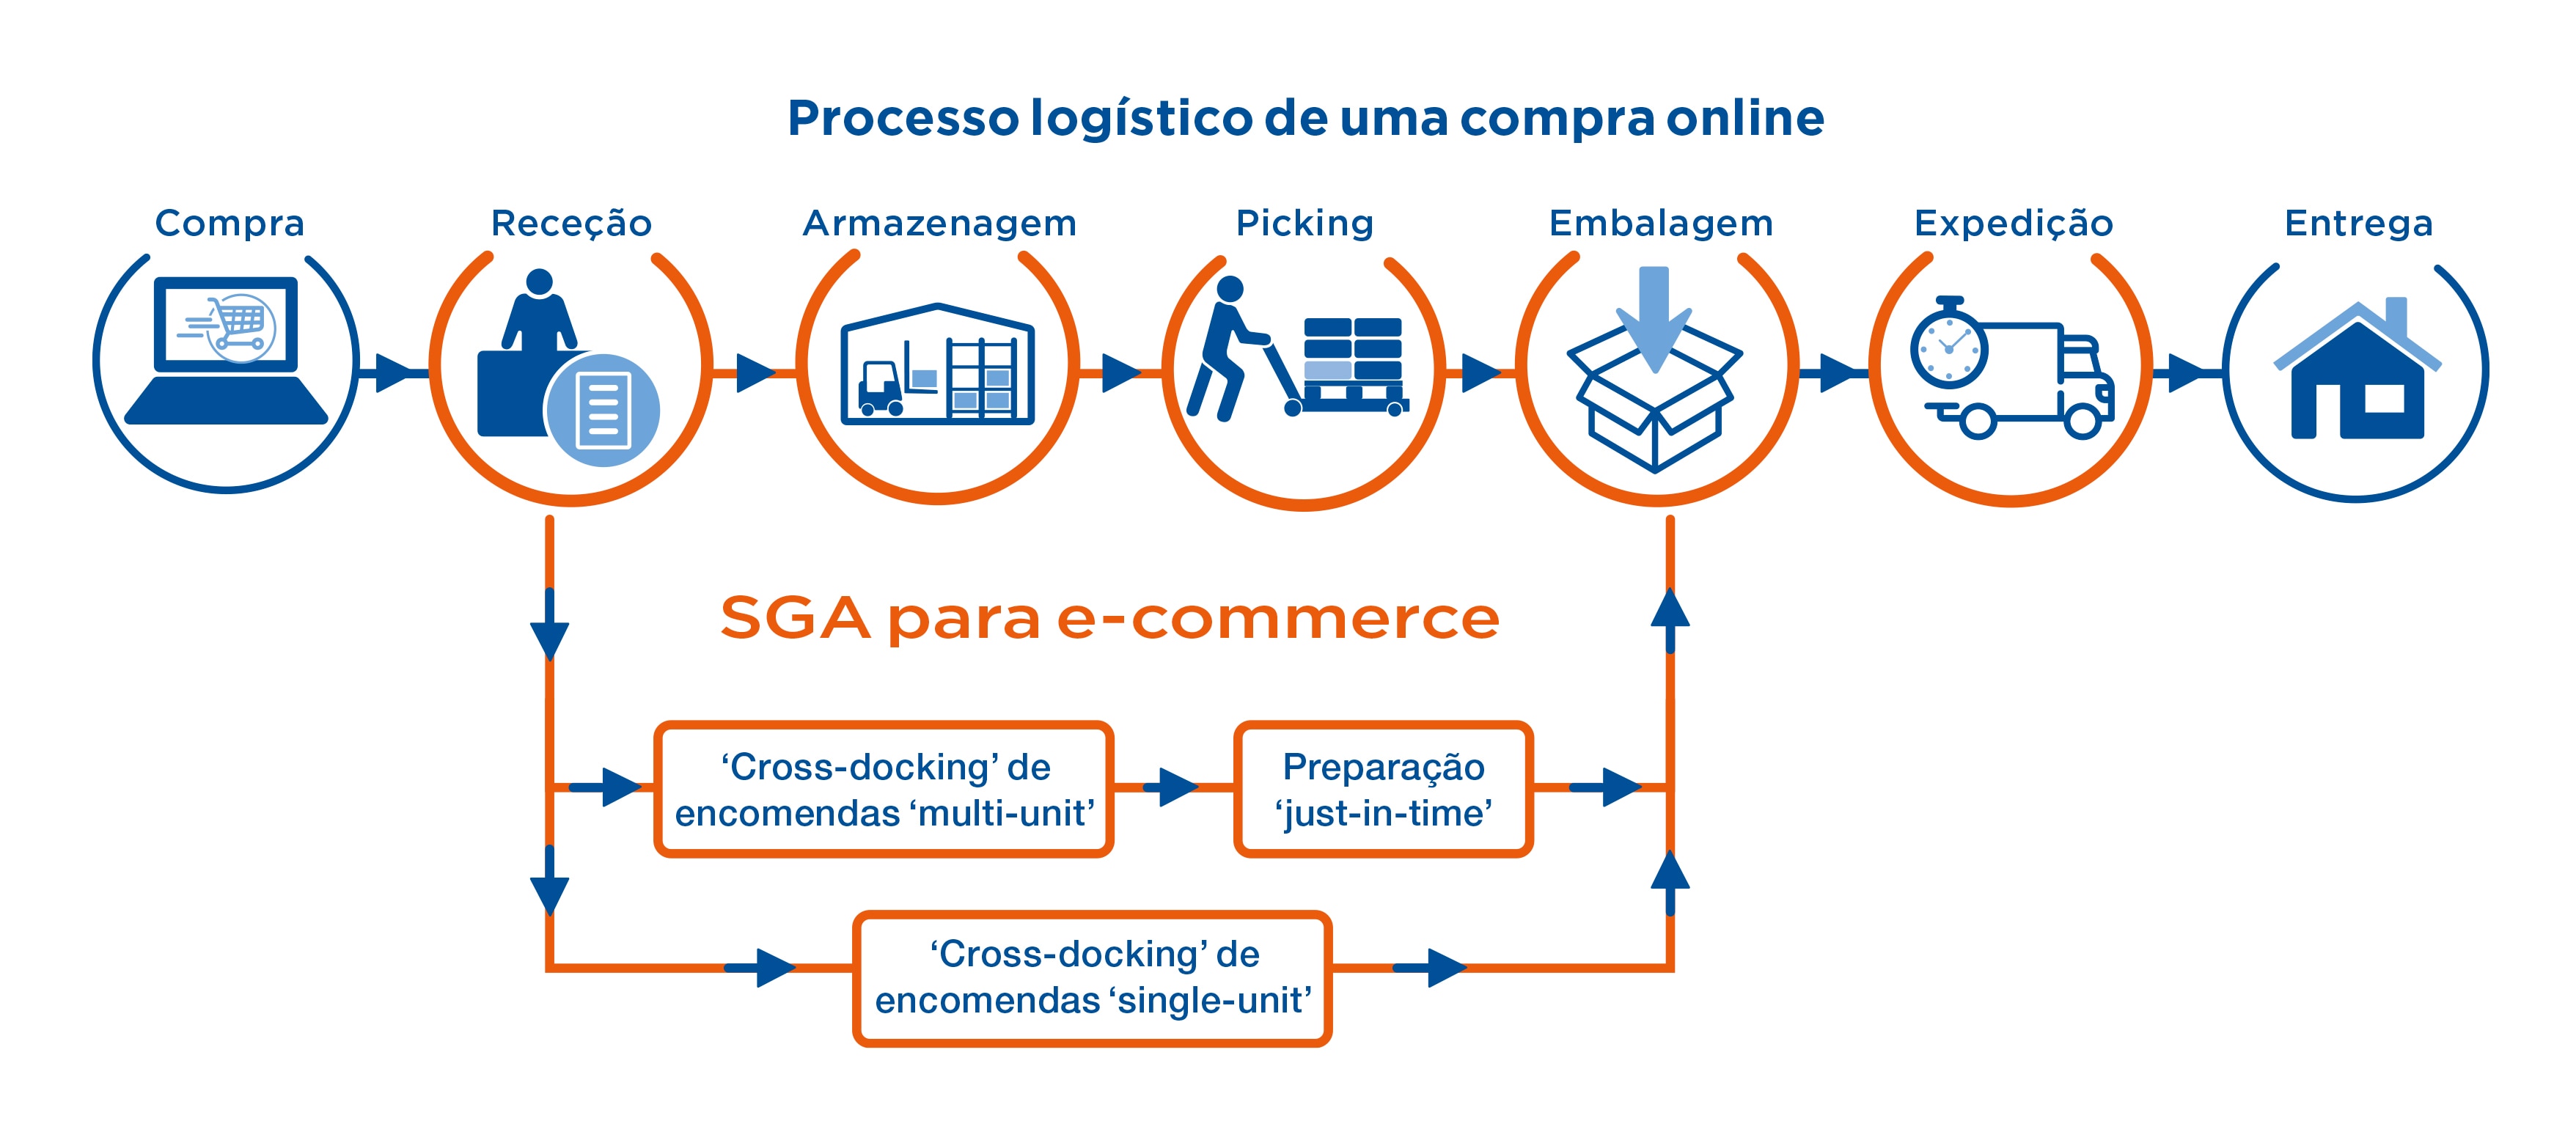 Logistics process of an online purchase